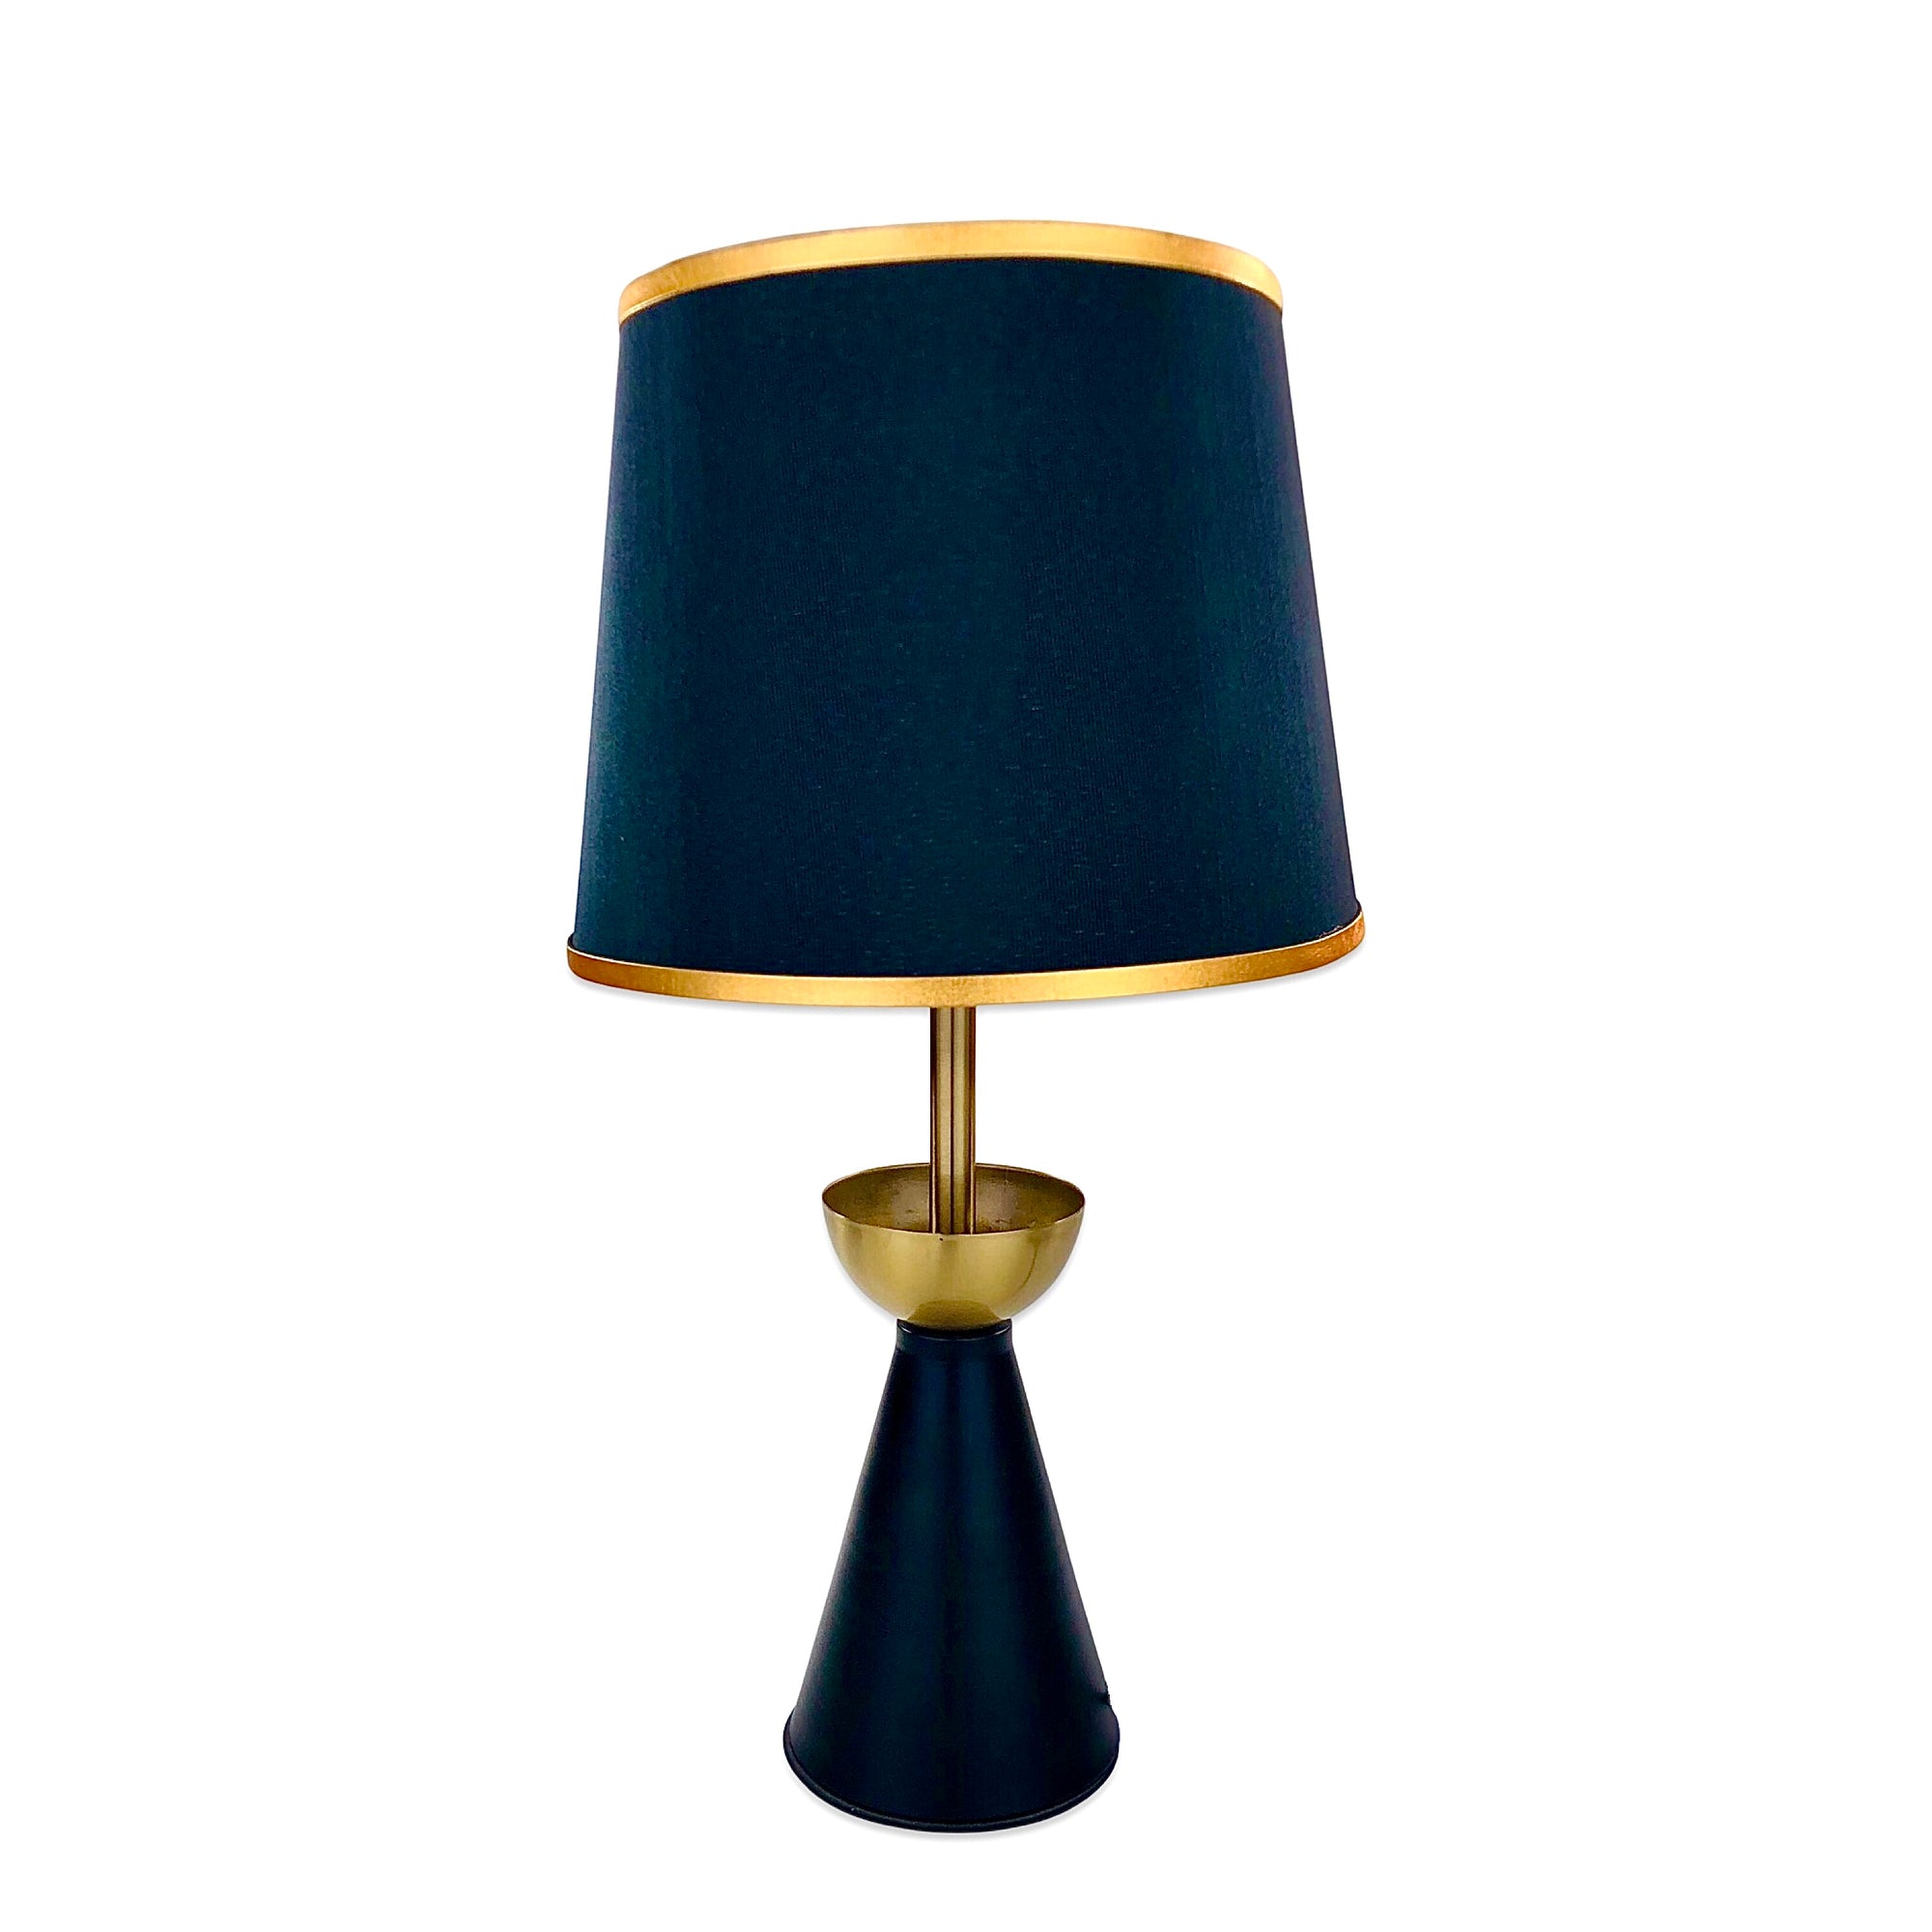 Black & Gold Texture Table Lamp